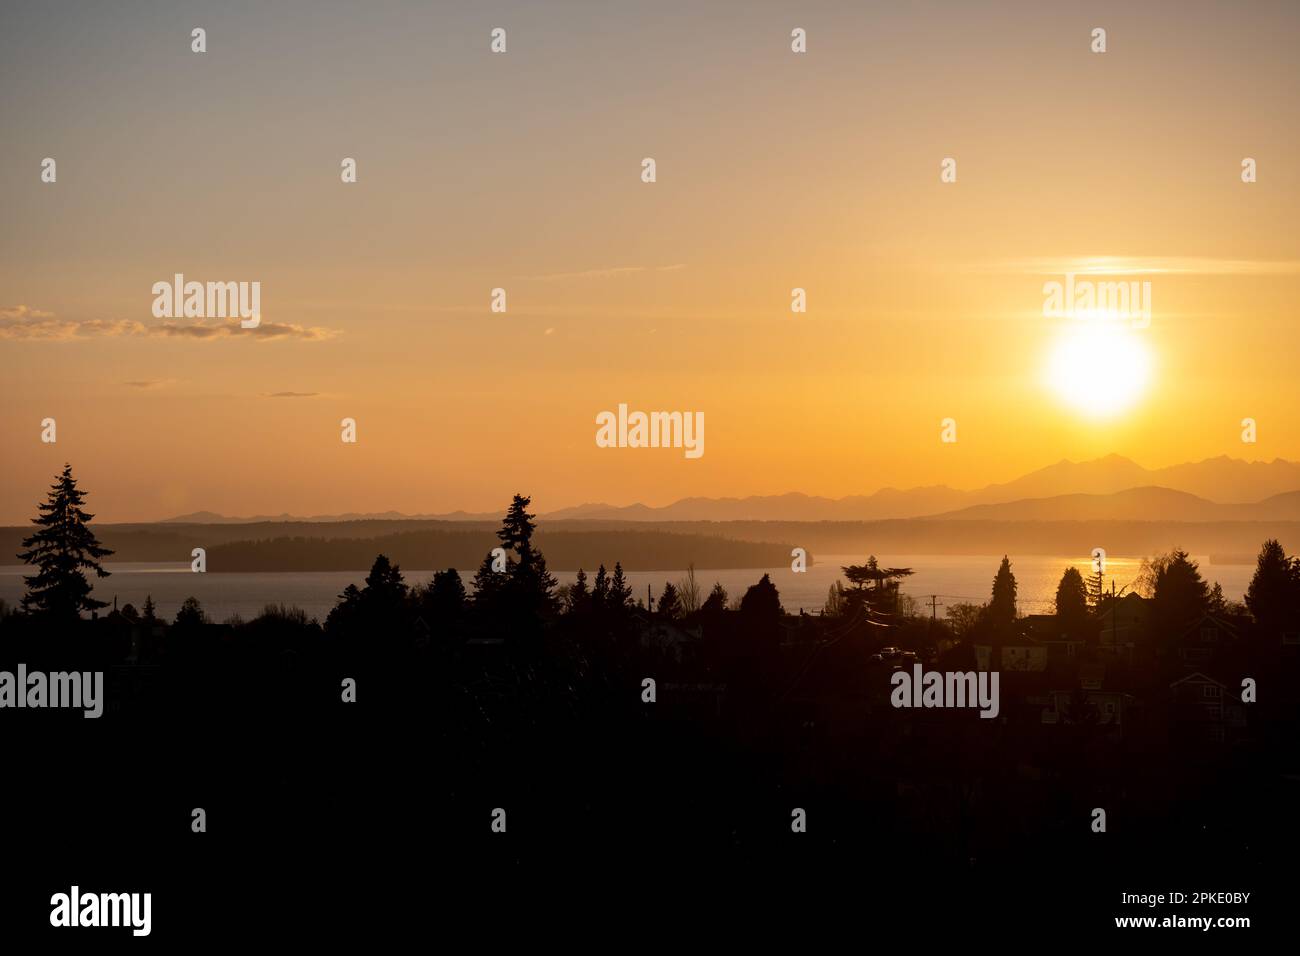 The sunset over the Olympic Mountain Range in Washington State as viewed from West Seattle Stock Photo